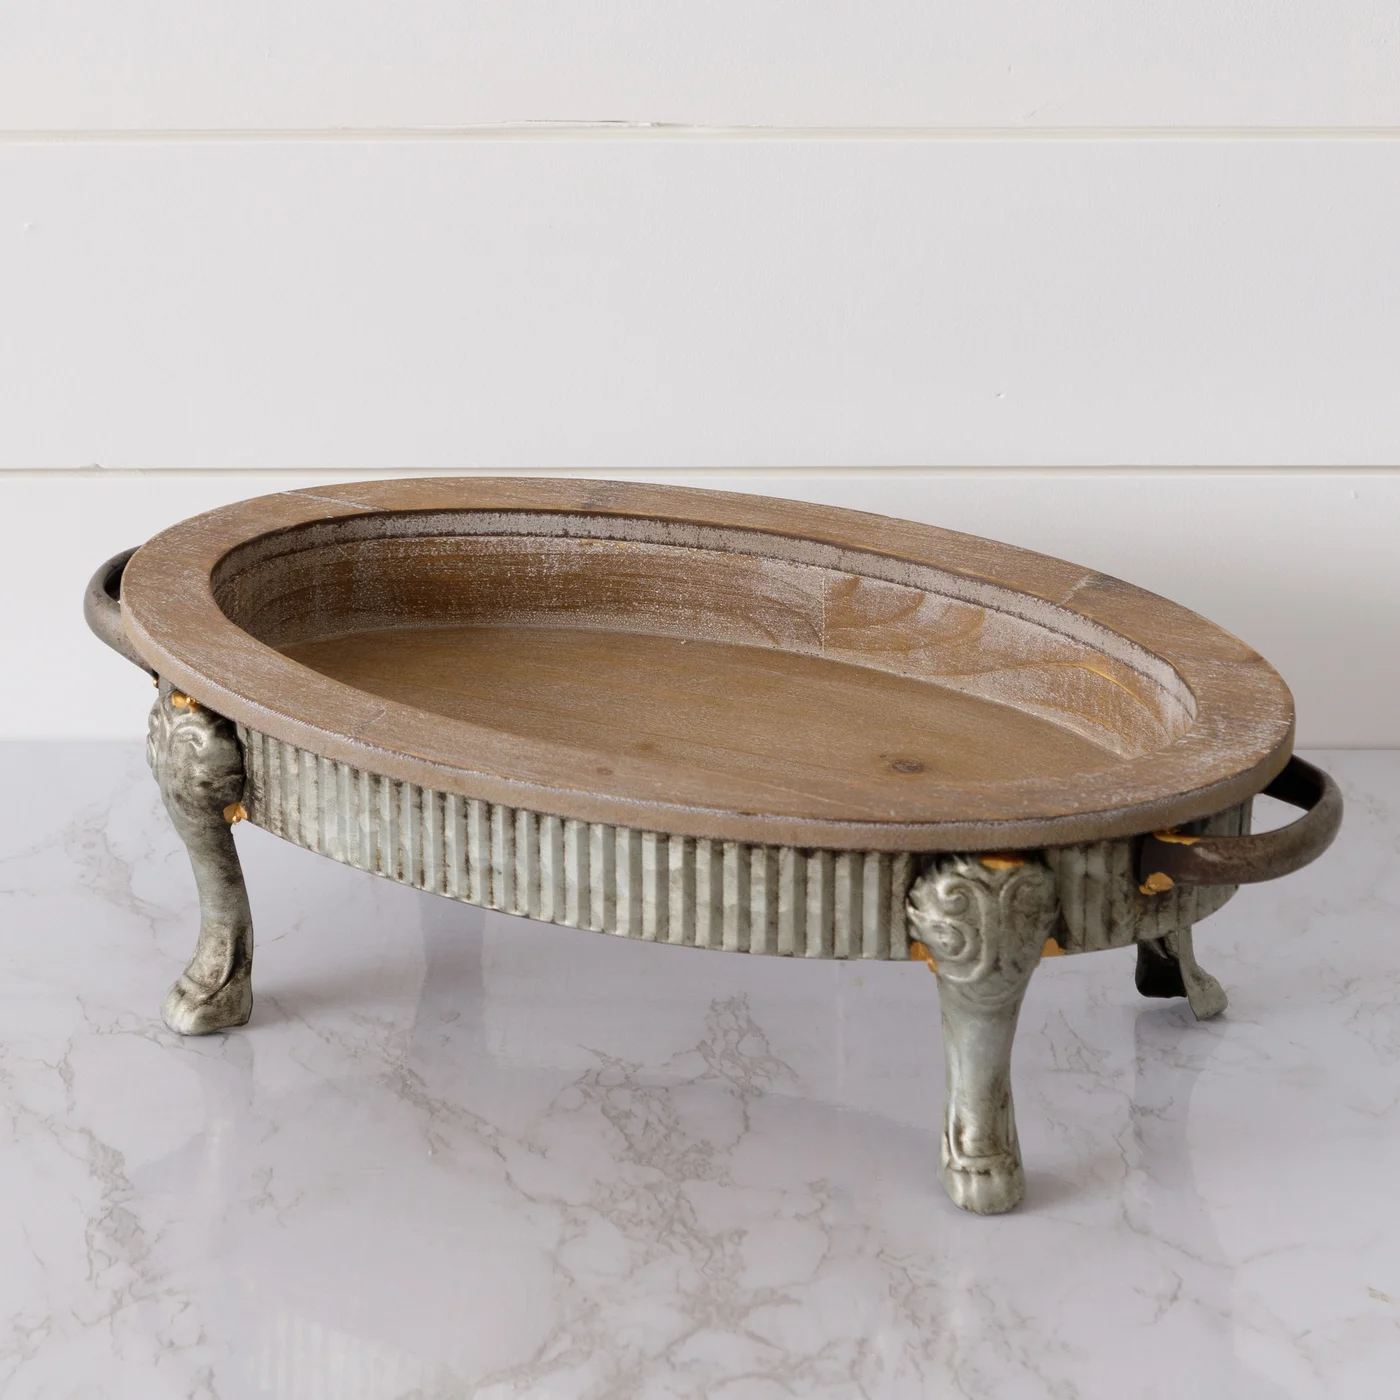 Wooden Distressed Tray with Clawfoot Metal Base